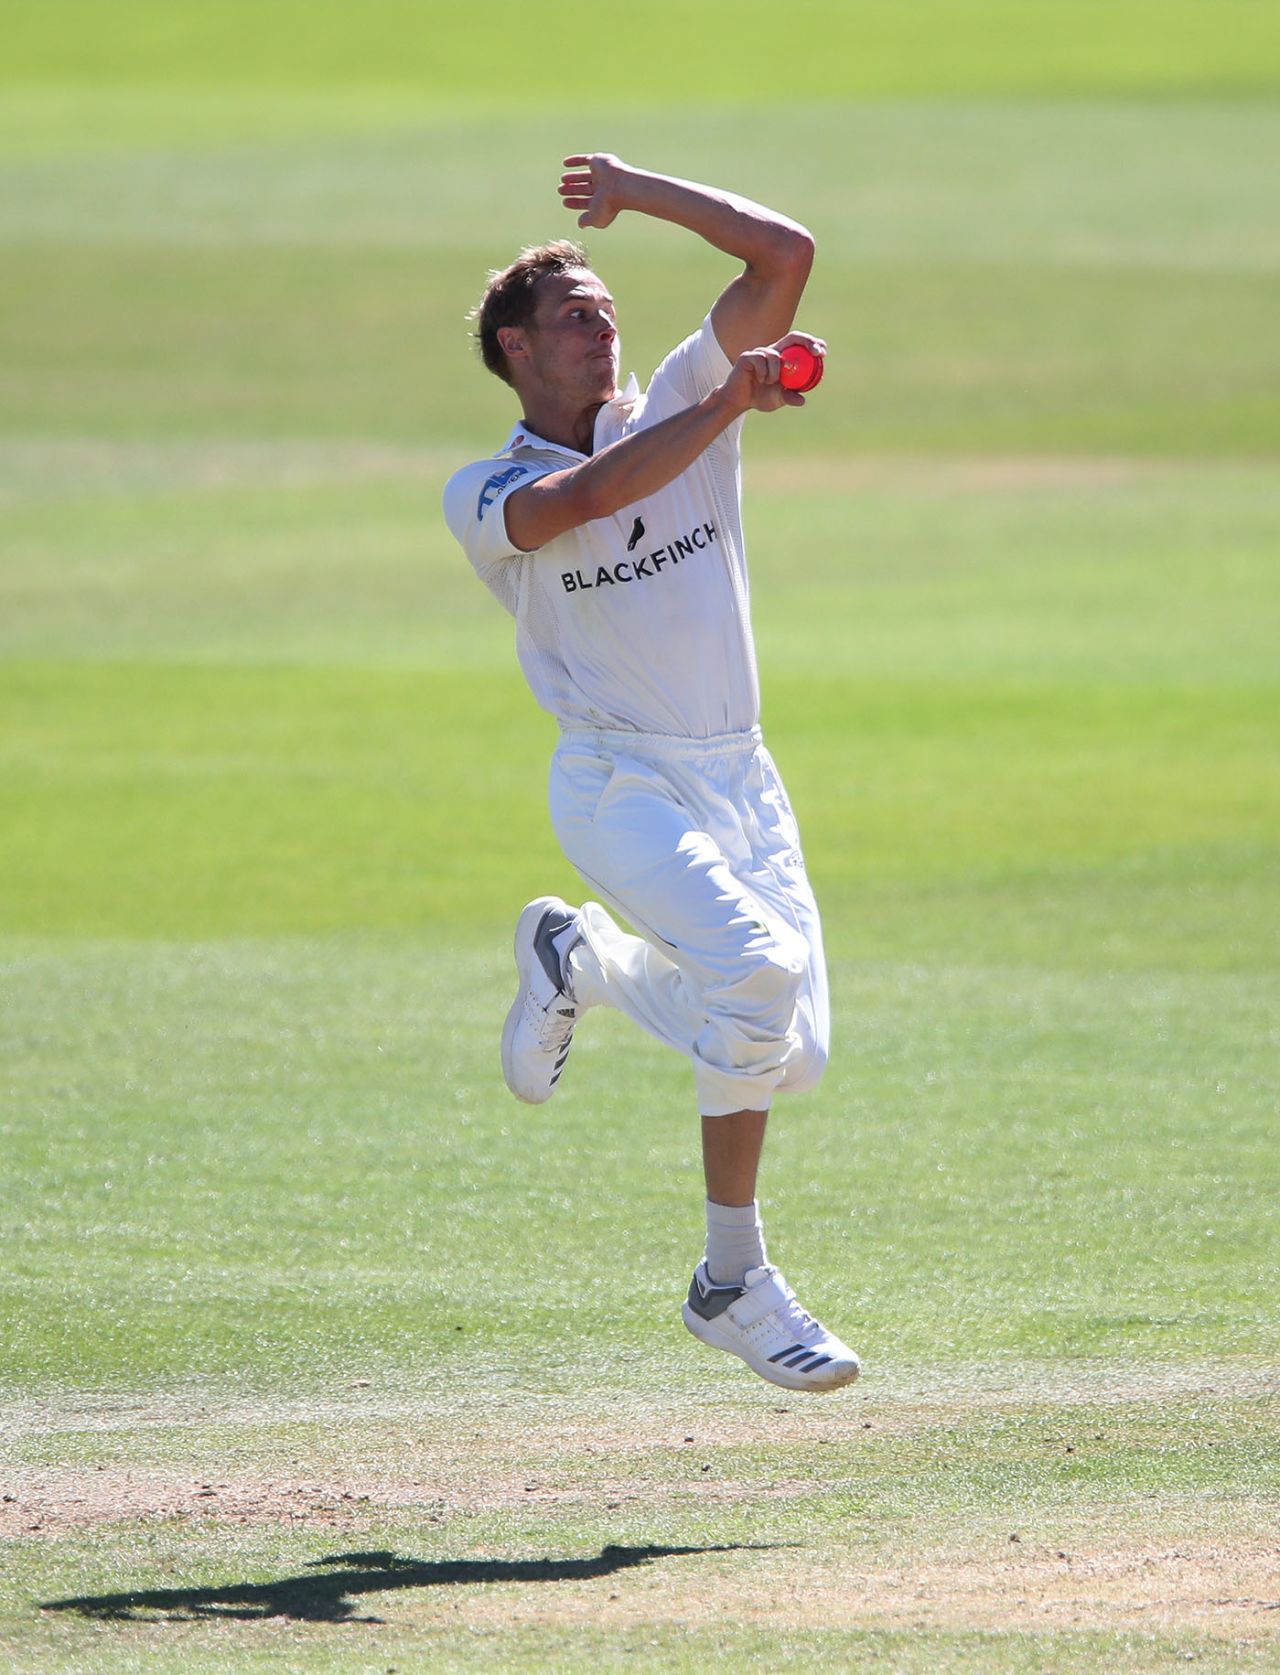 Worcestershire bowler Charlie Morris in action during a County Championship match against Nottingham at Trent Bridge, June 27, 2018